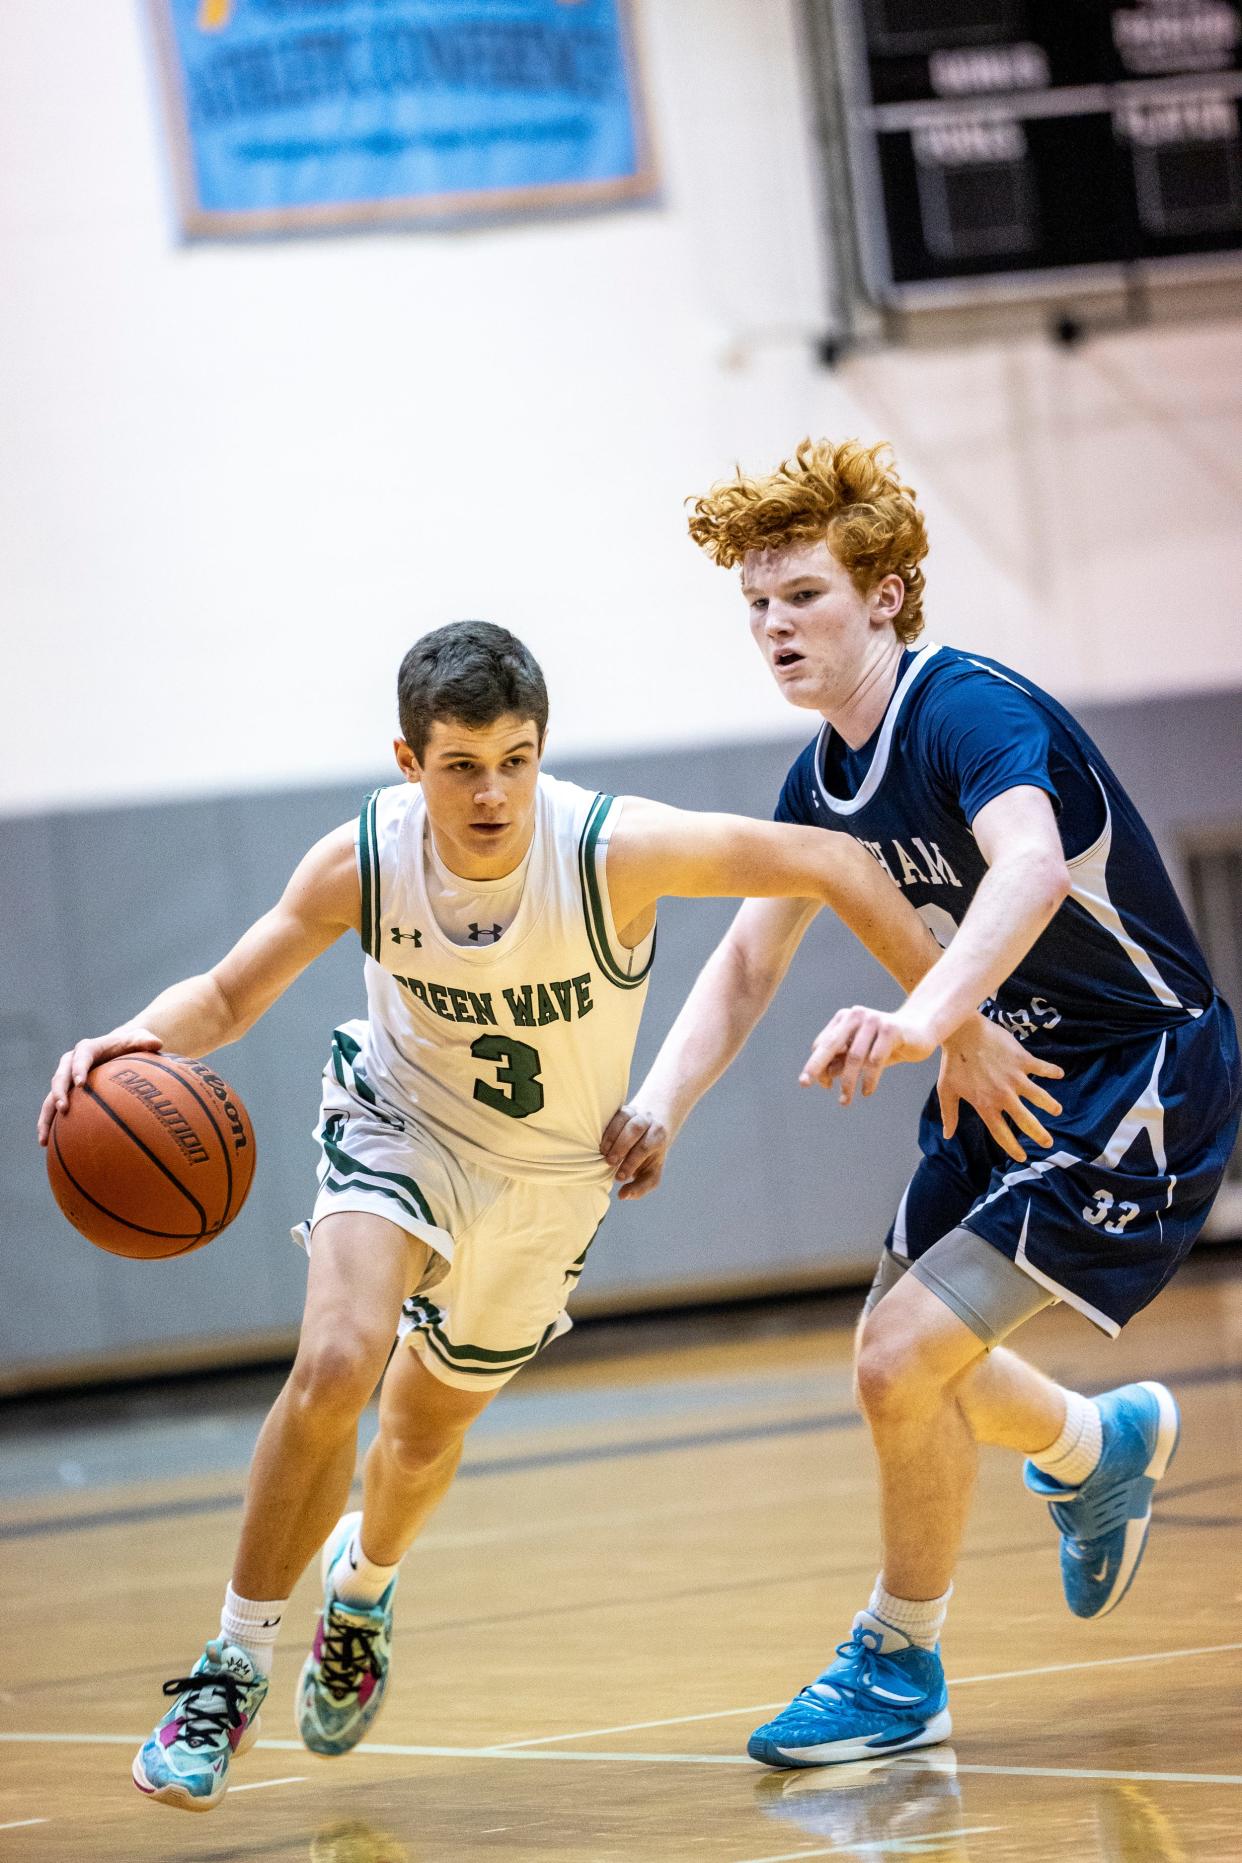 Chatham plays Delbarton in the Morris County Tournament boys basketball semifinals at County College of Morris in Randolph, NJ on Saturday, Feb. 11, 2023. D #3 Will McGinty and C #33 Michael MacAniff.